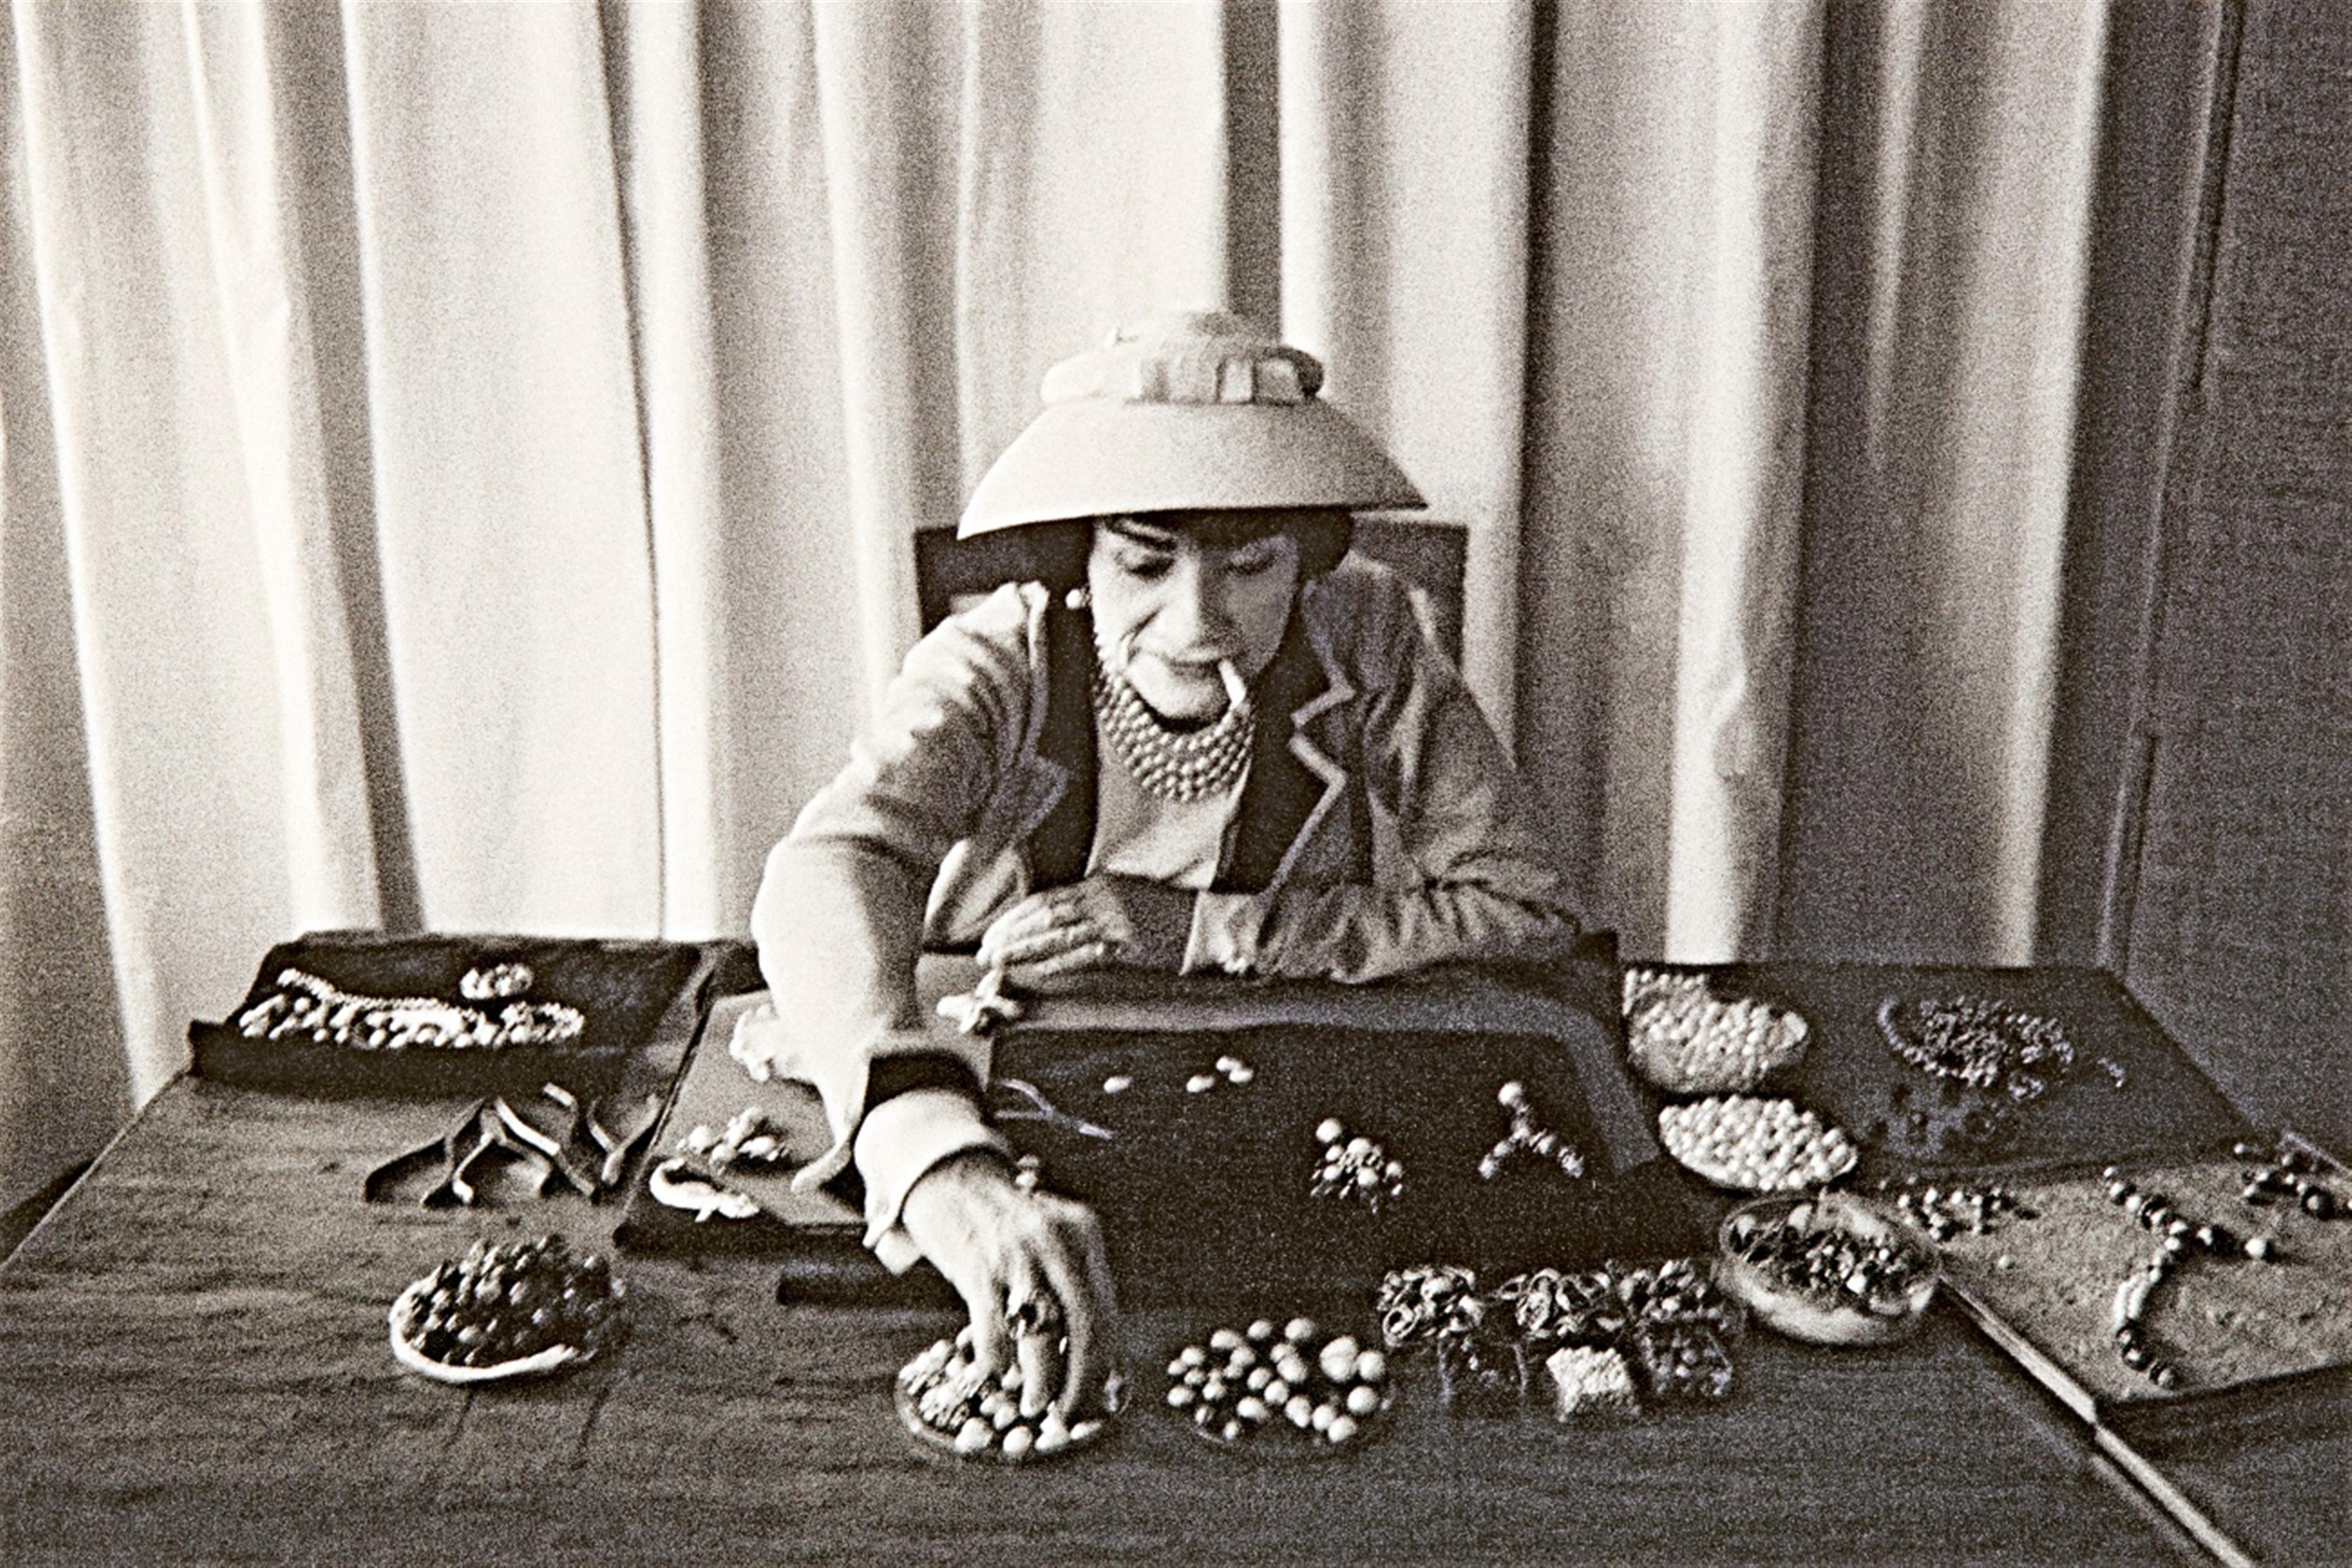 Mark Shaw, Coco Chanel creates jewelry in her workroom, 1957 - image-1